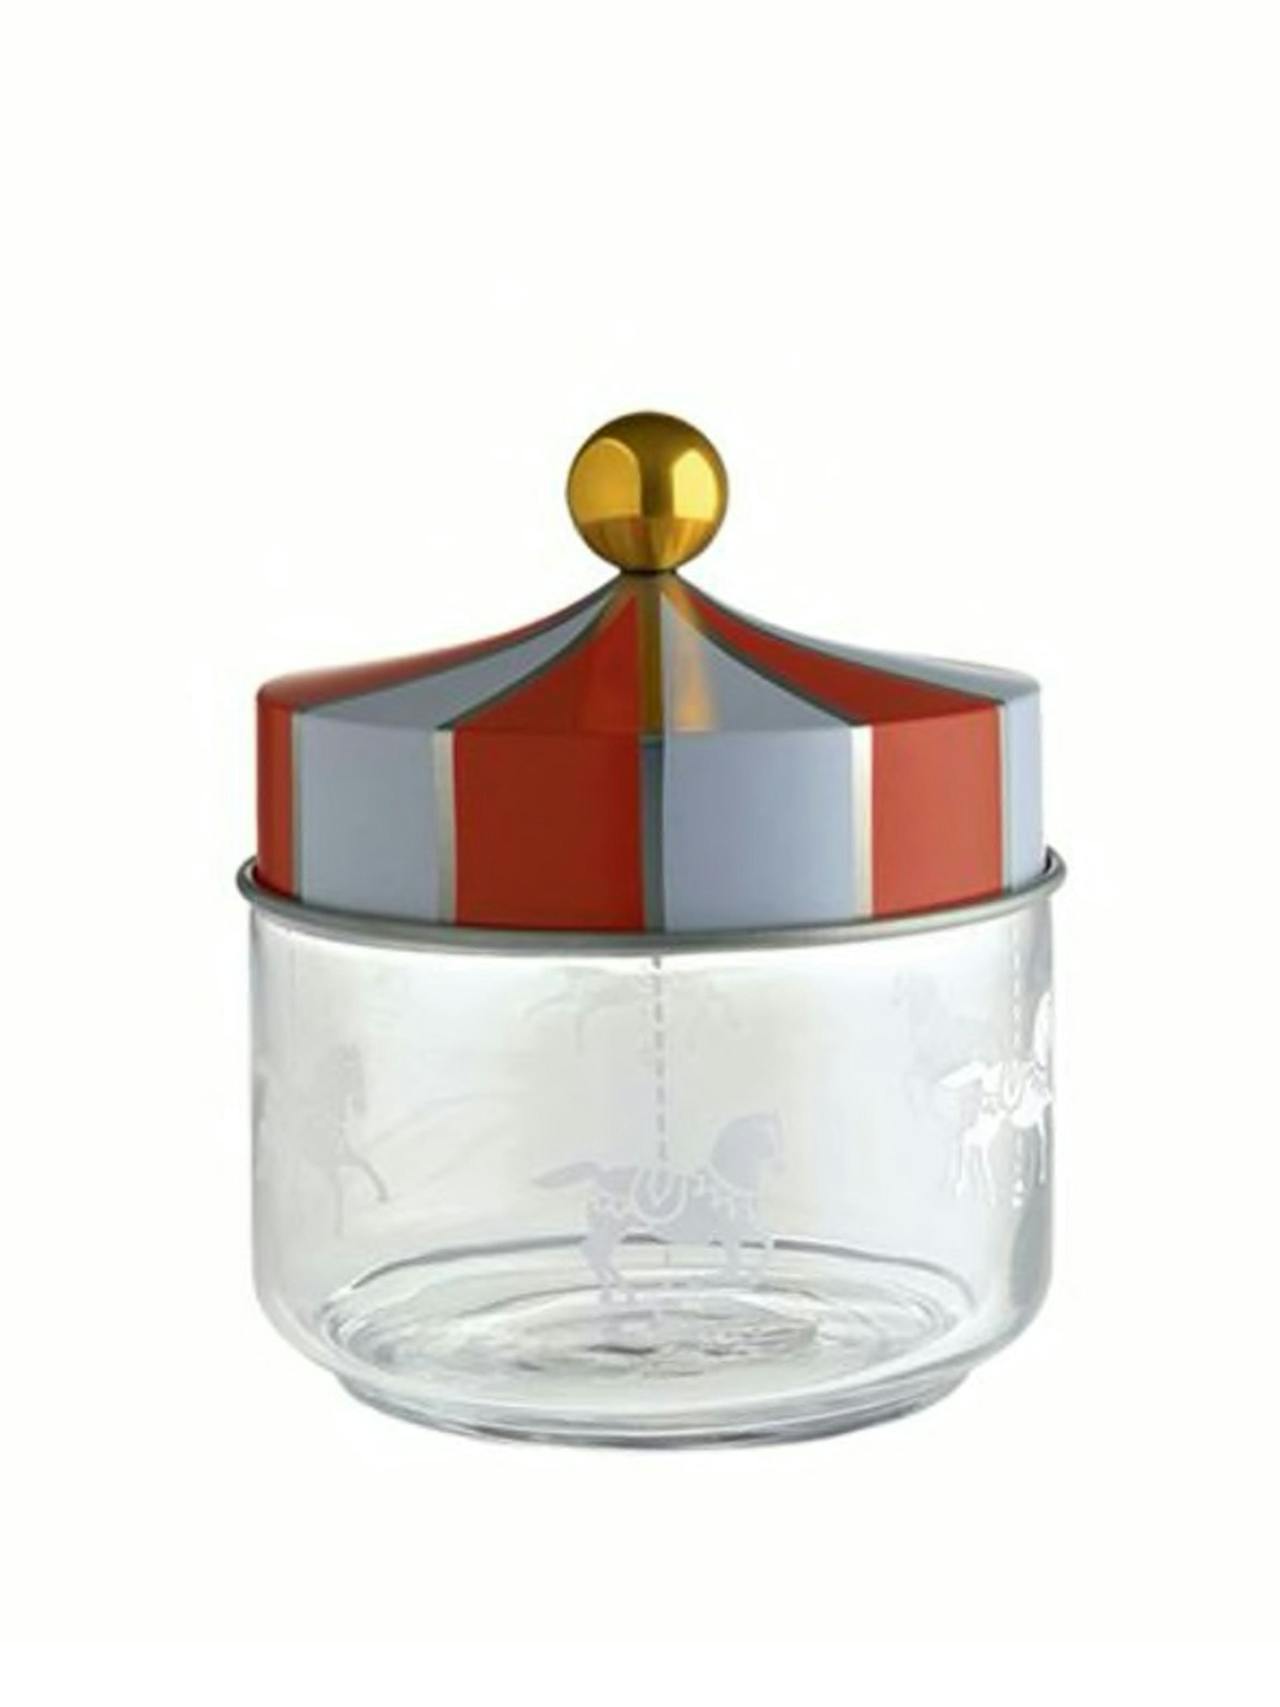 Circus small glass container